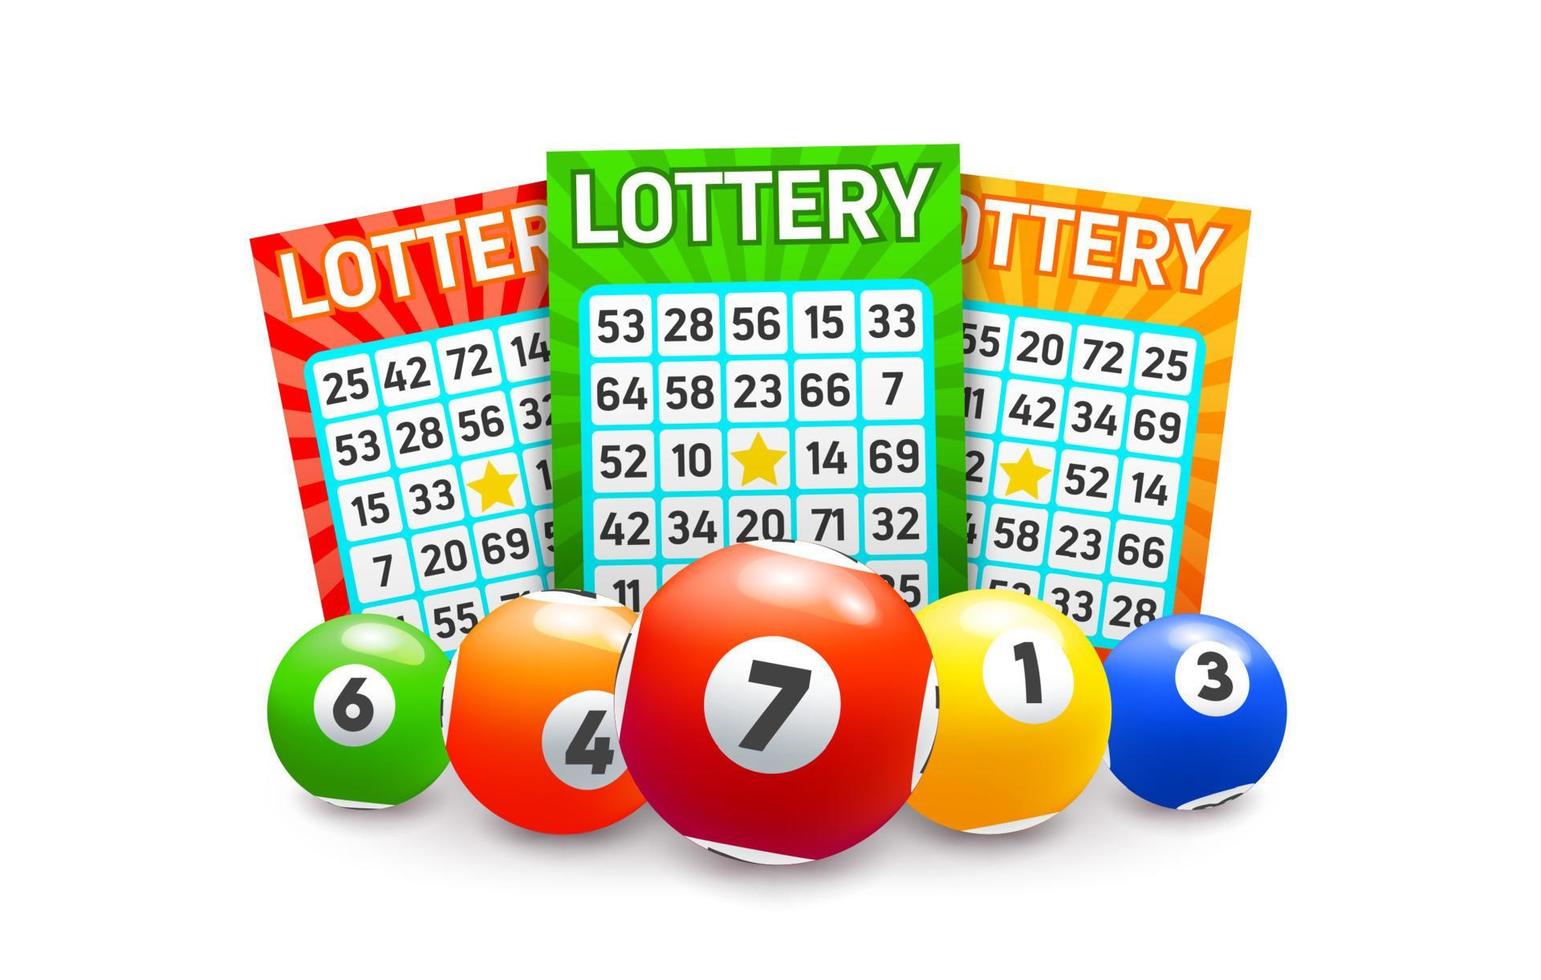 Bingo lottery balls and lotto tickets background vector